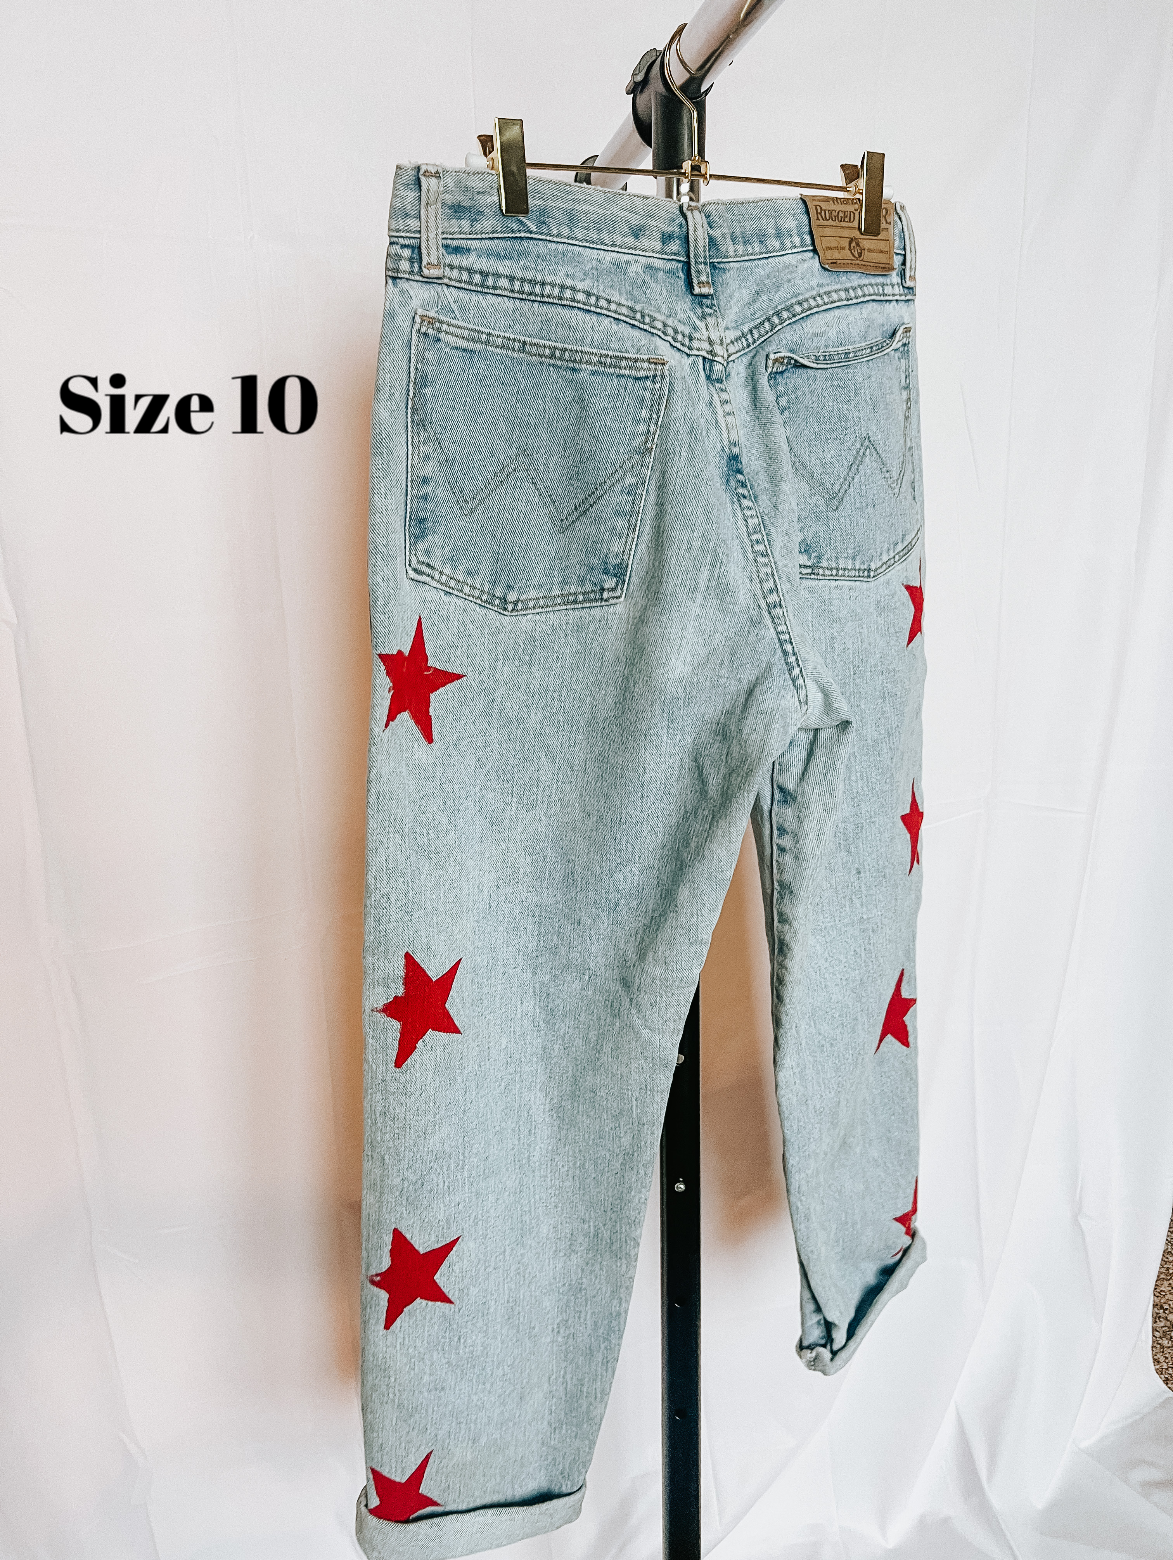 Red Star jeans